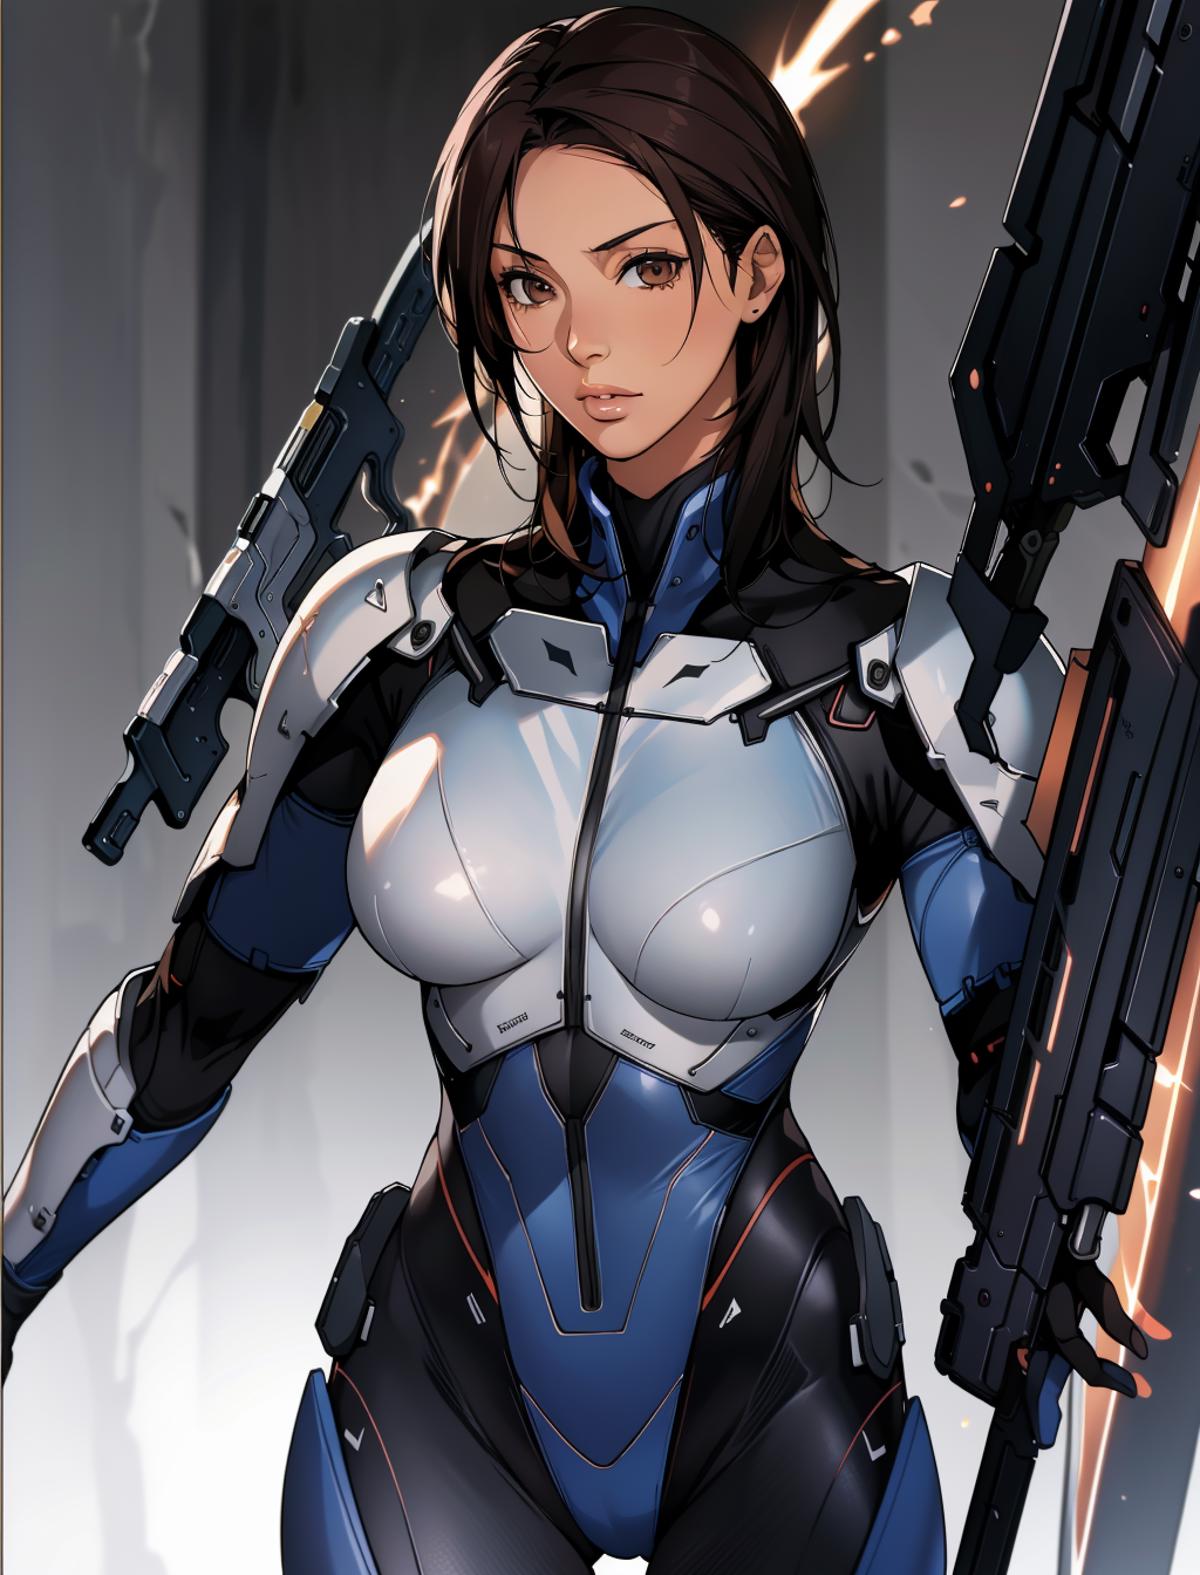 Ashley from Mass Effect image by Zileans